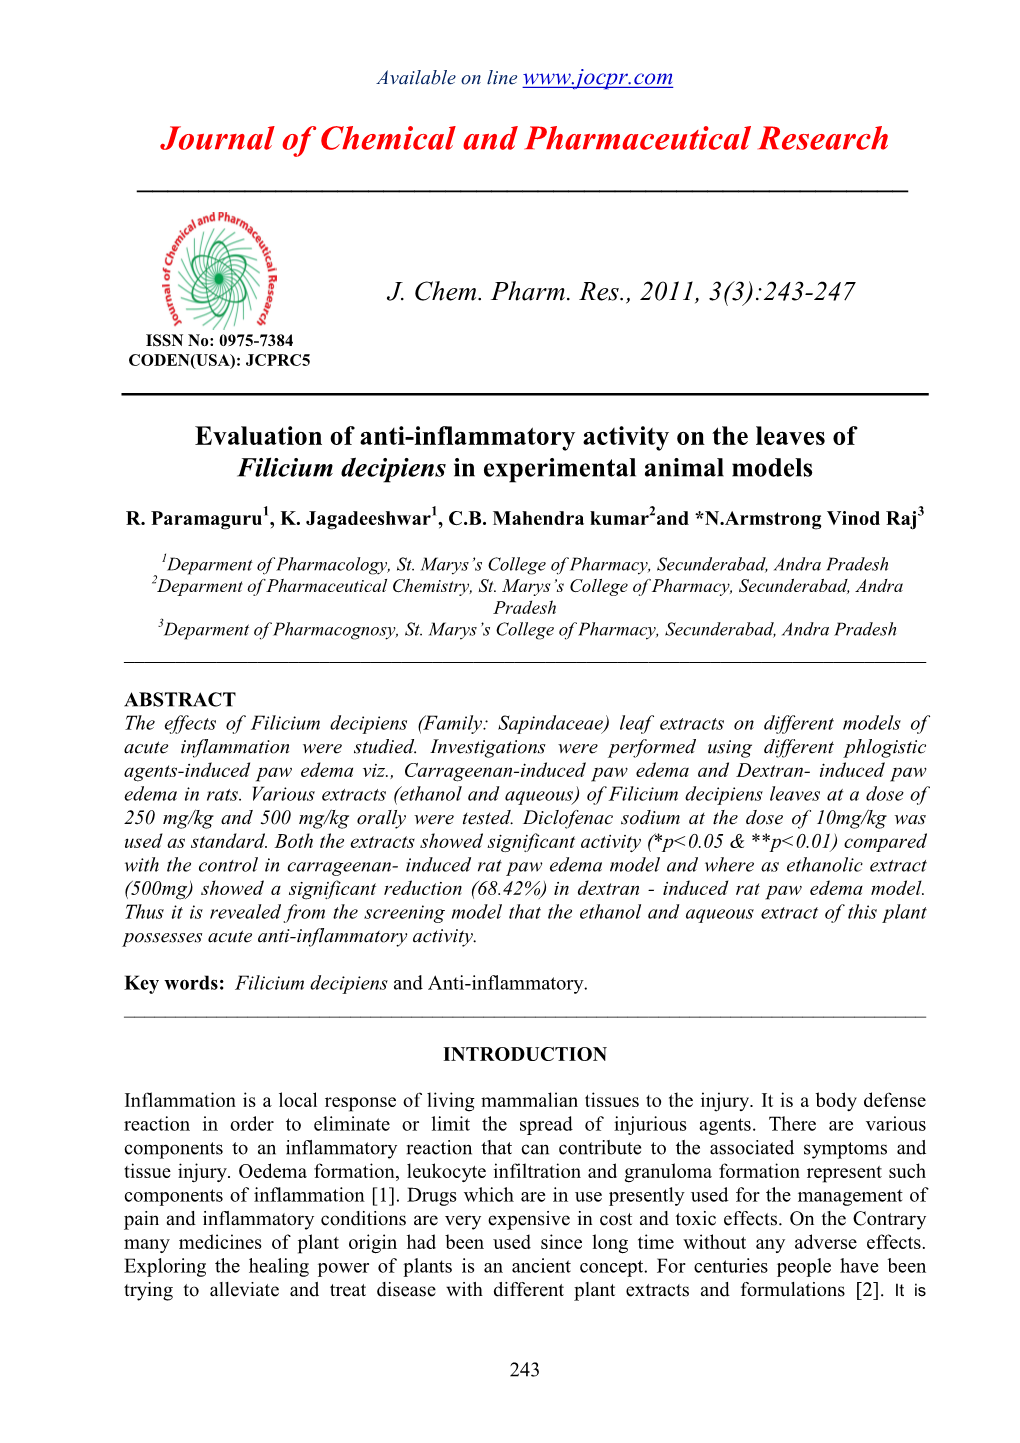 Evaluation of Antiinflammatory Activity on the Leaves of Filicium Decipiens